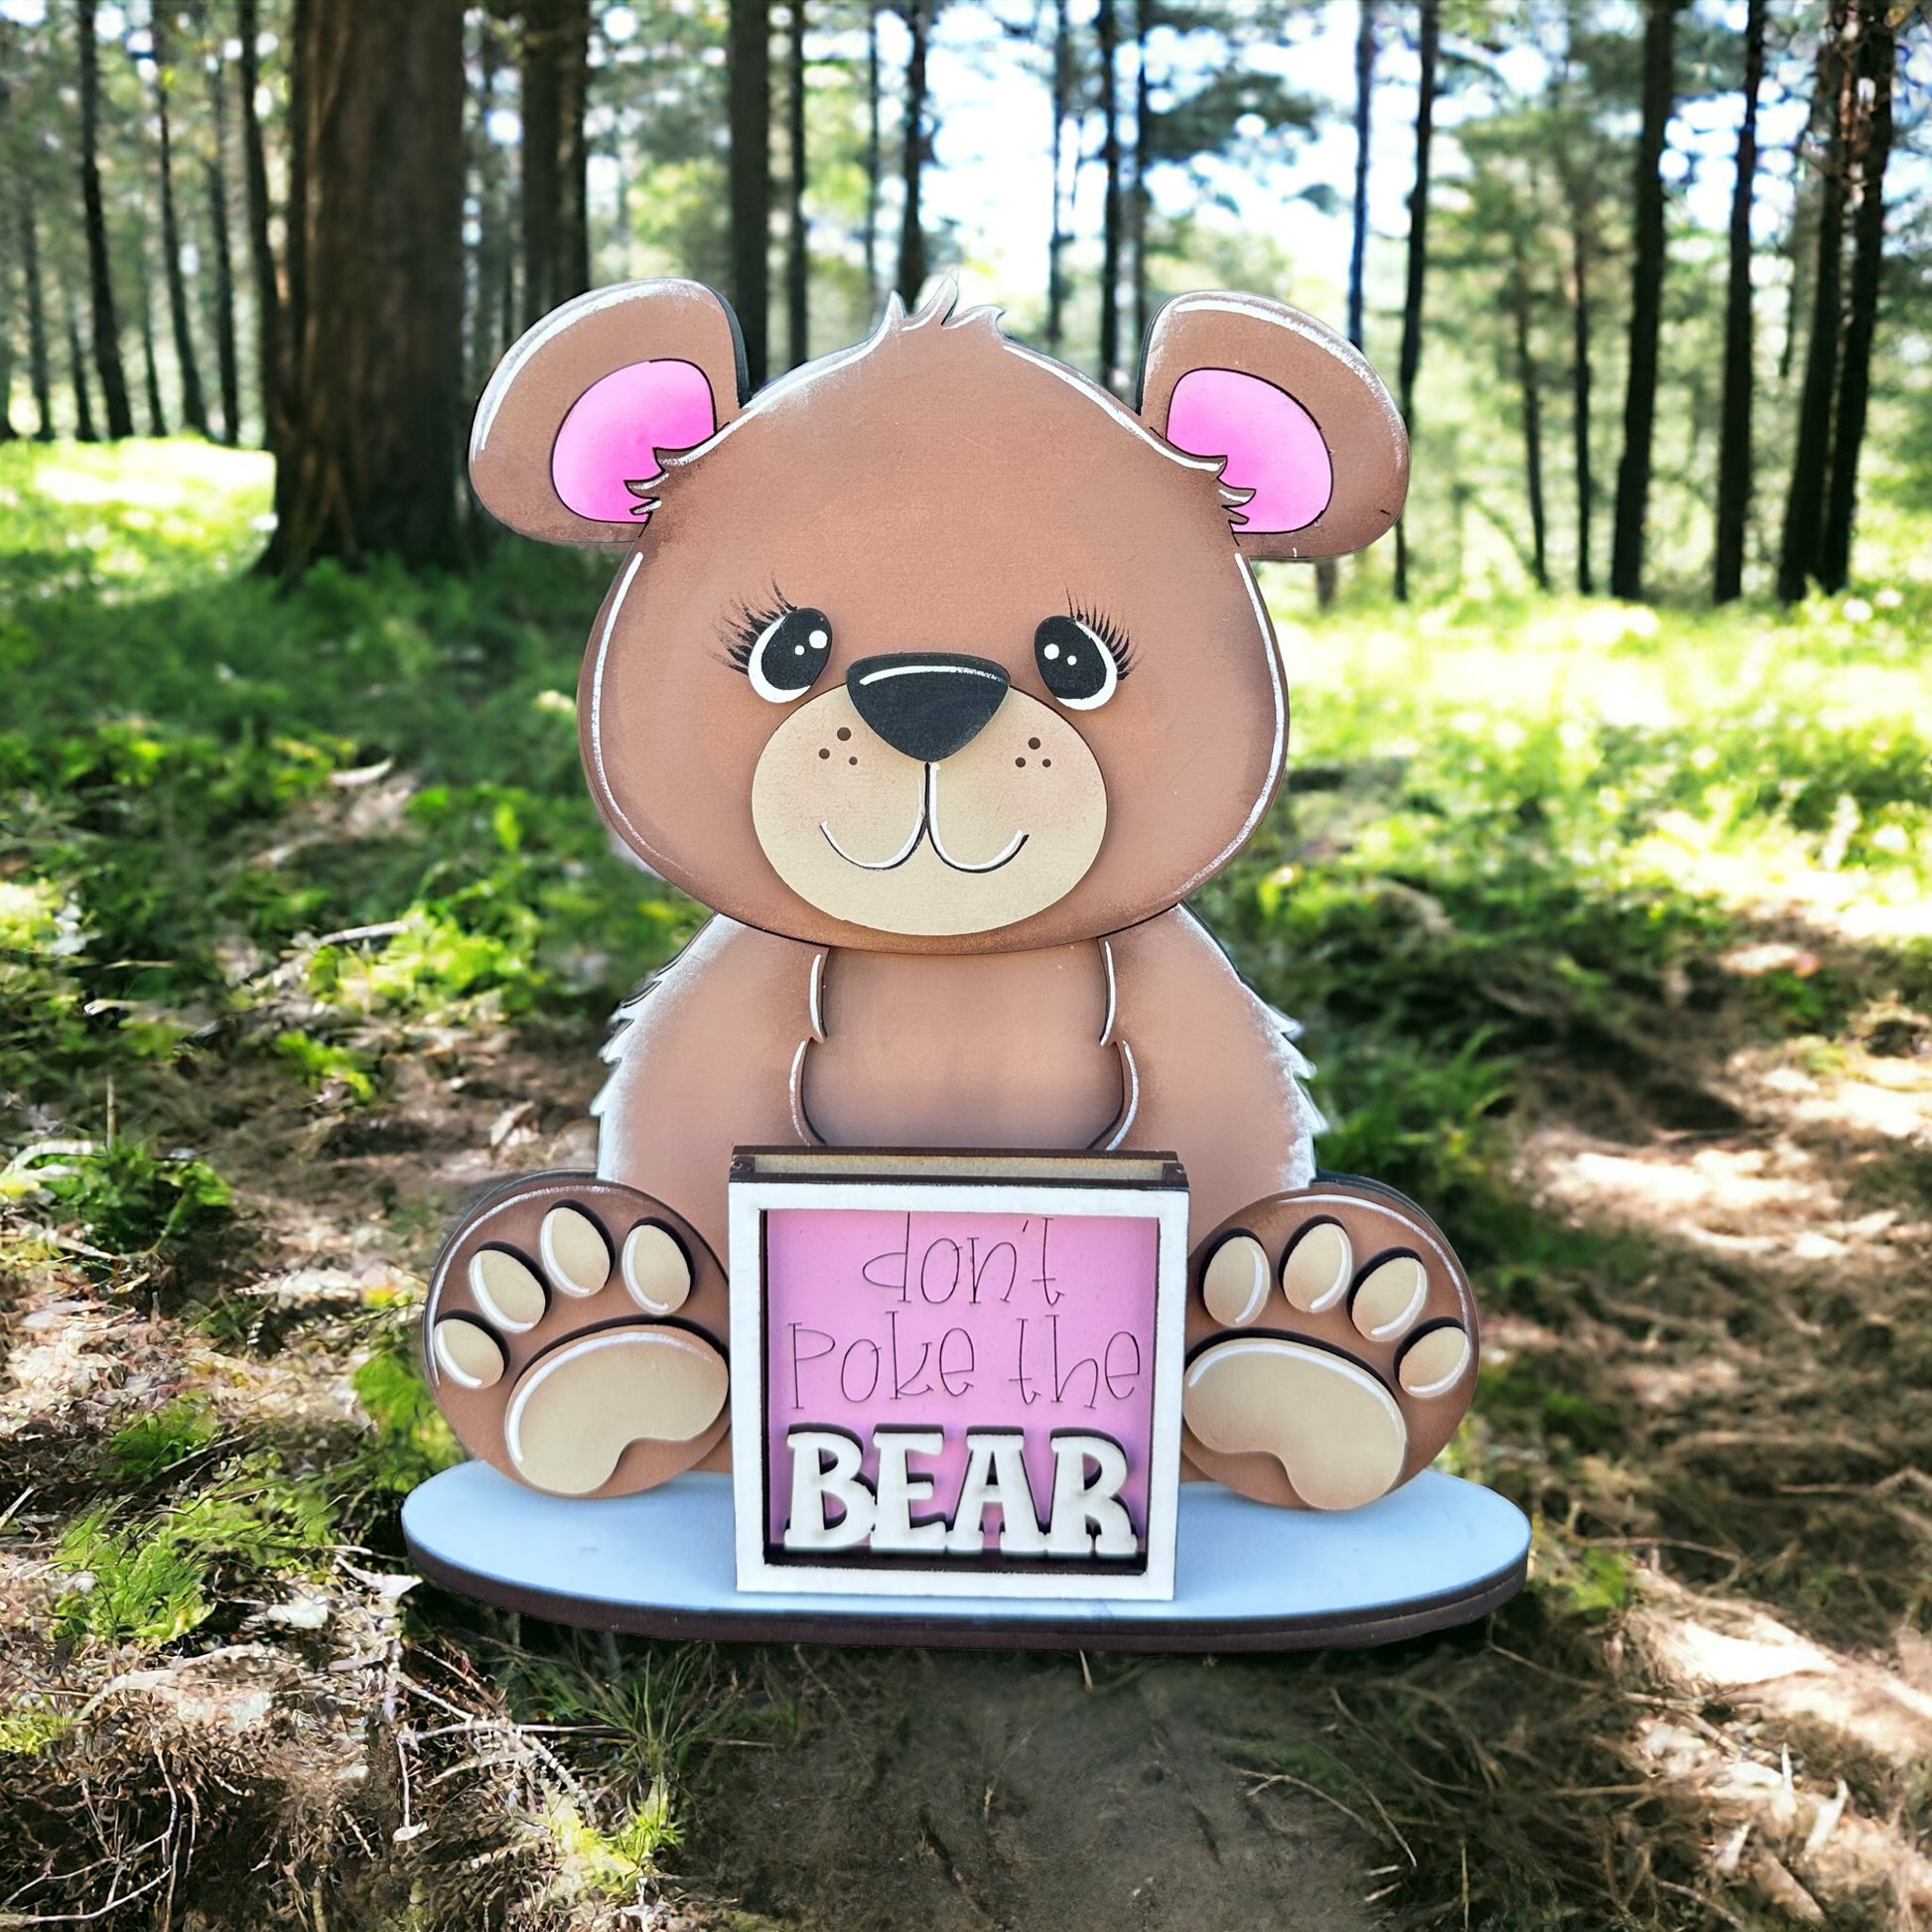 a brown teddy bear sitting on top of a sign